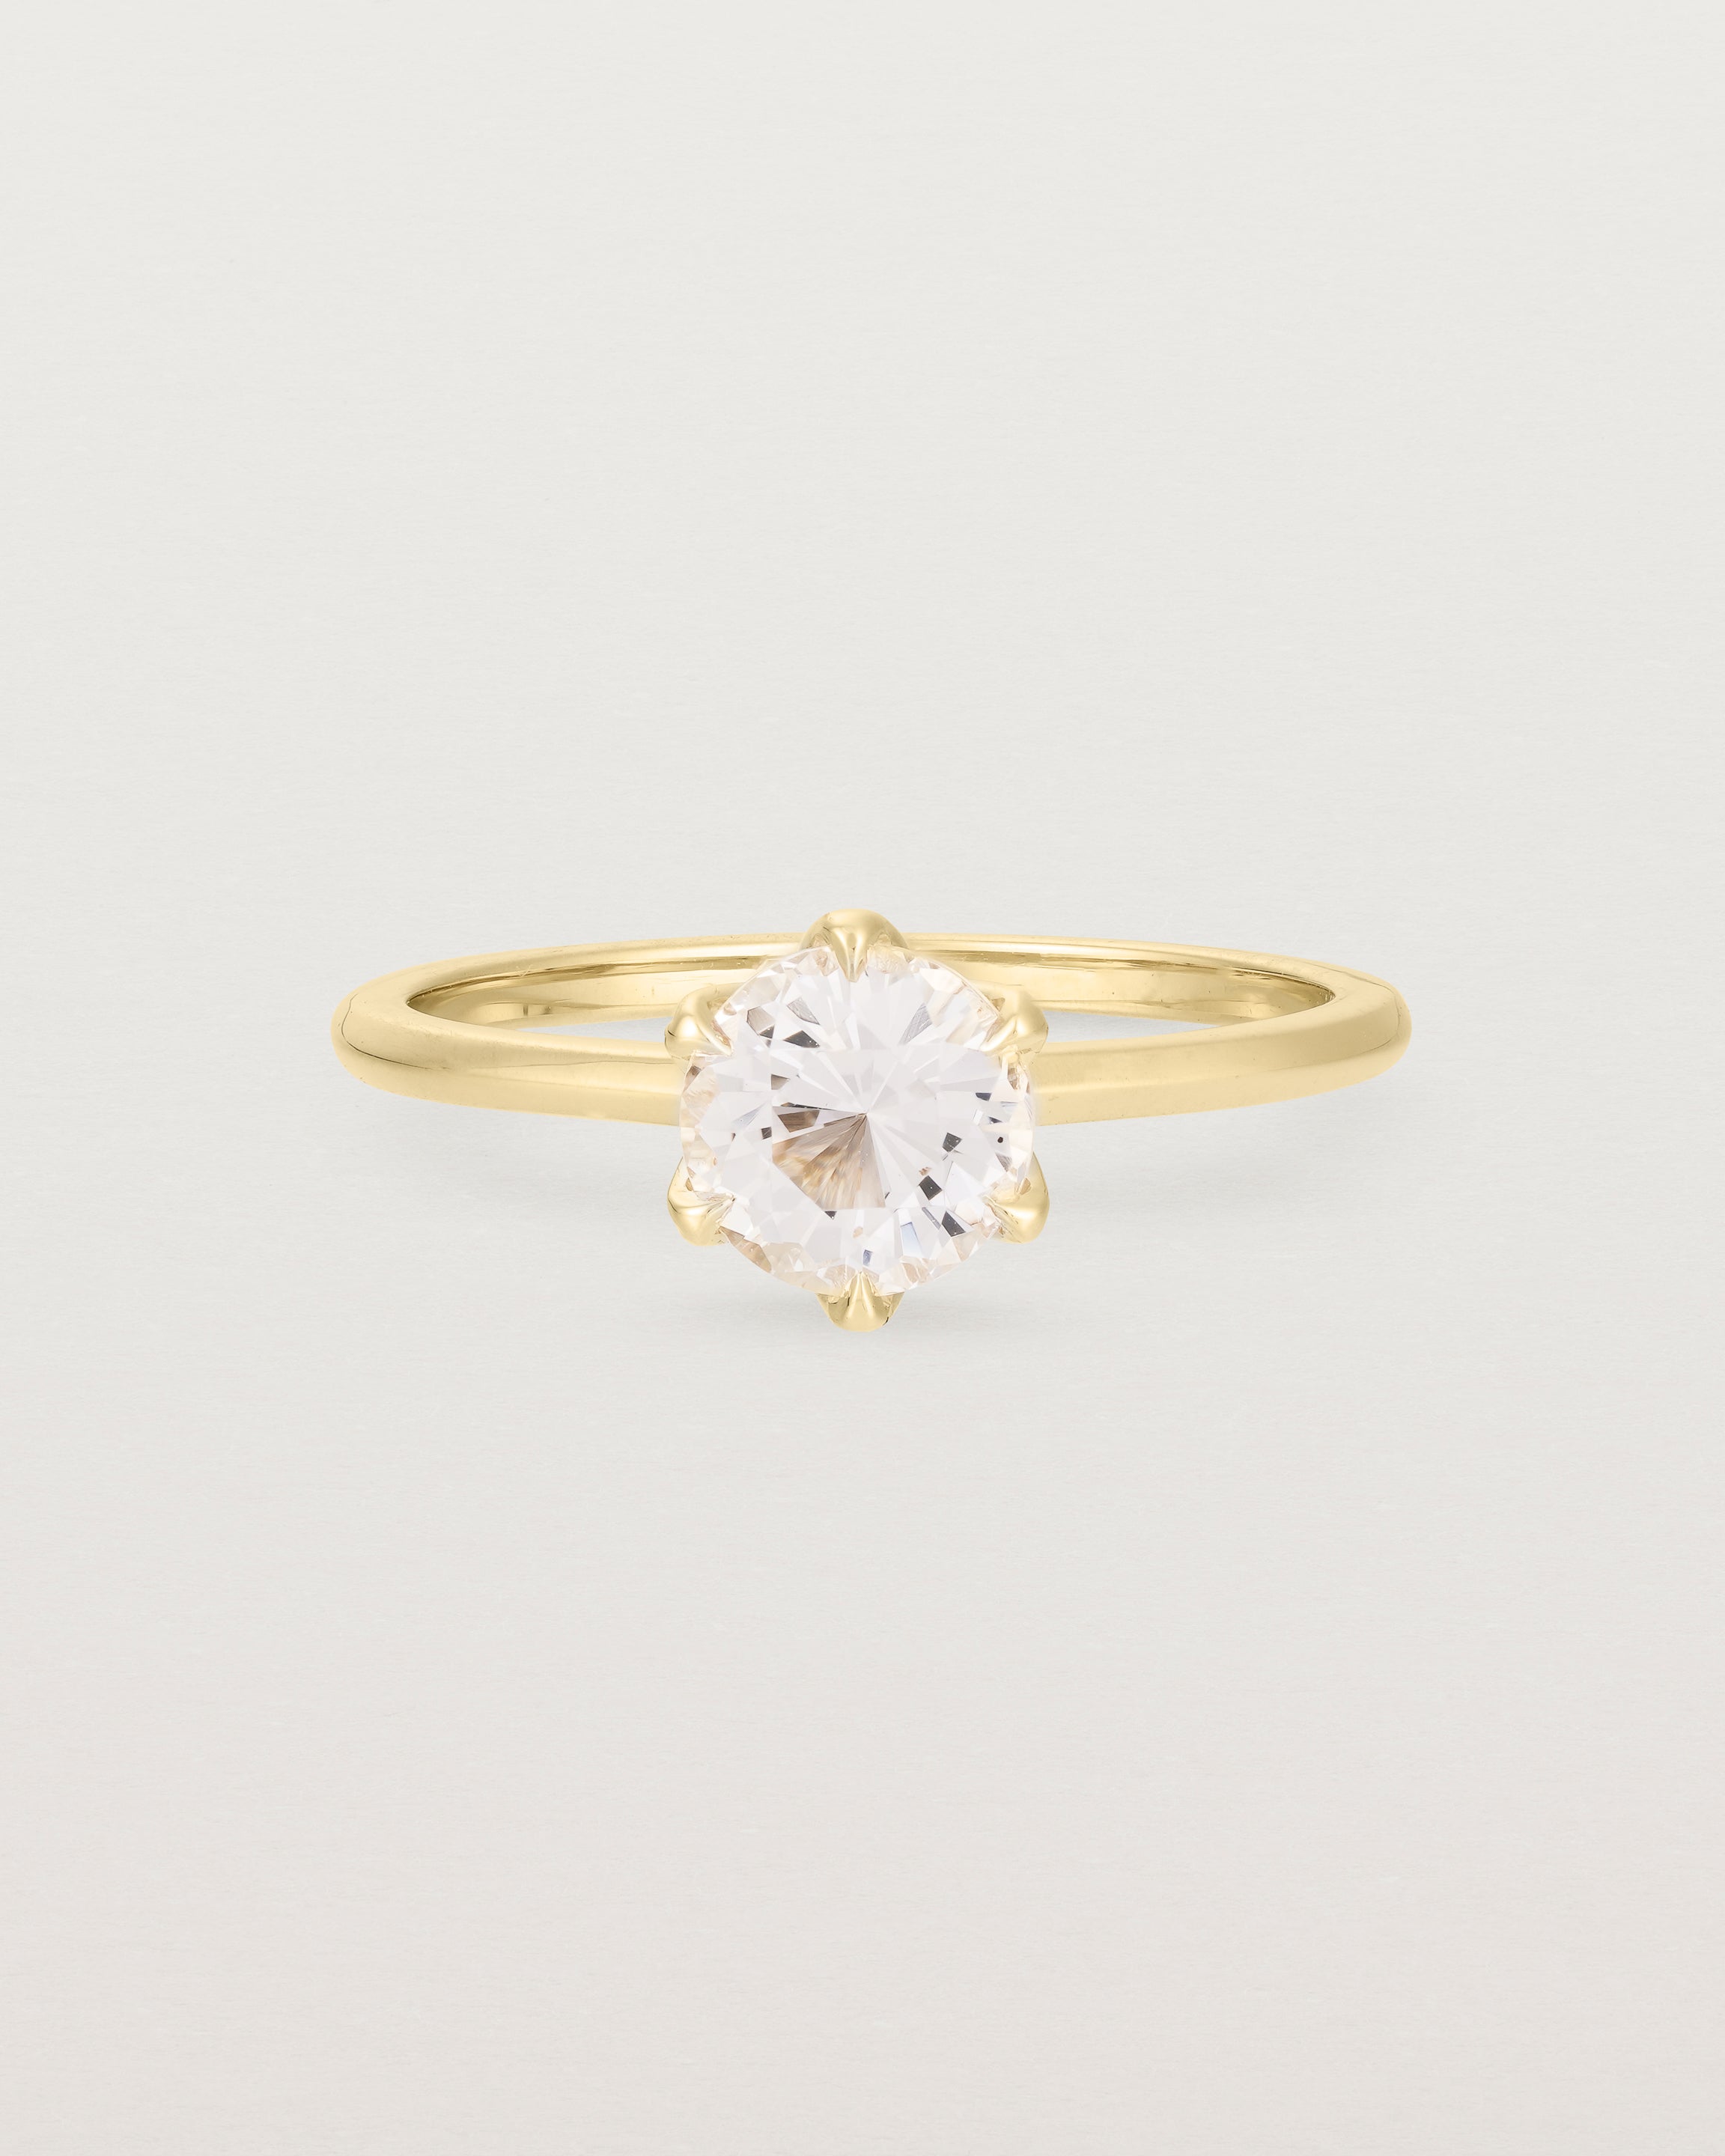 Front view of the Mandala Solitaire Ring | Morganite & Diamonds | Yellow Gold.